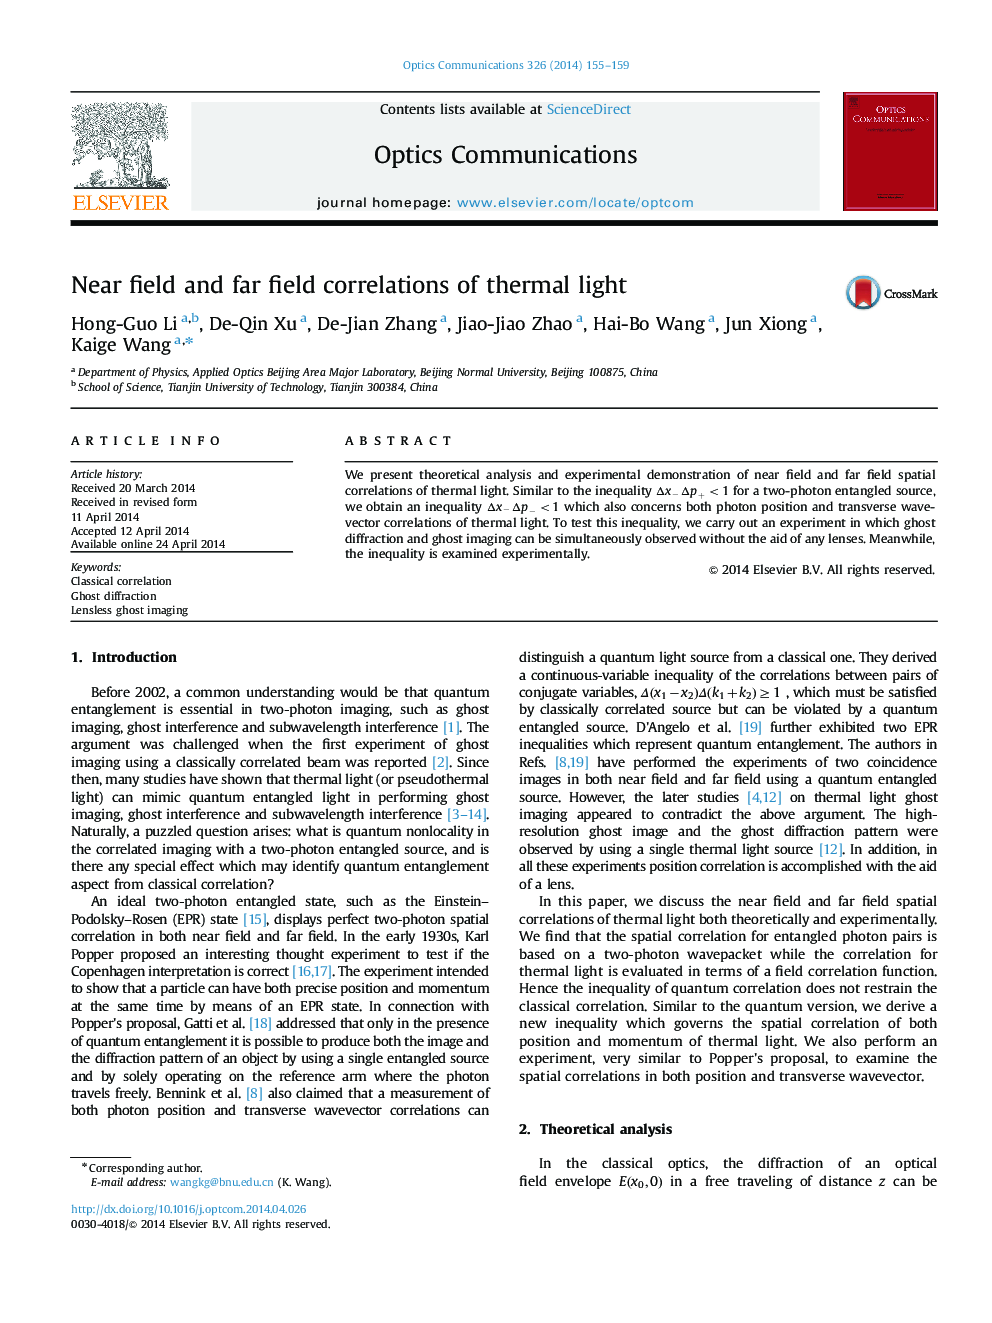 Near field and far field correlations of thermal light